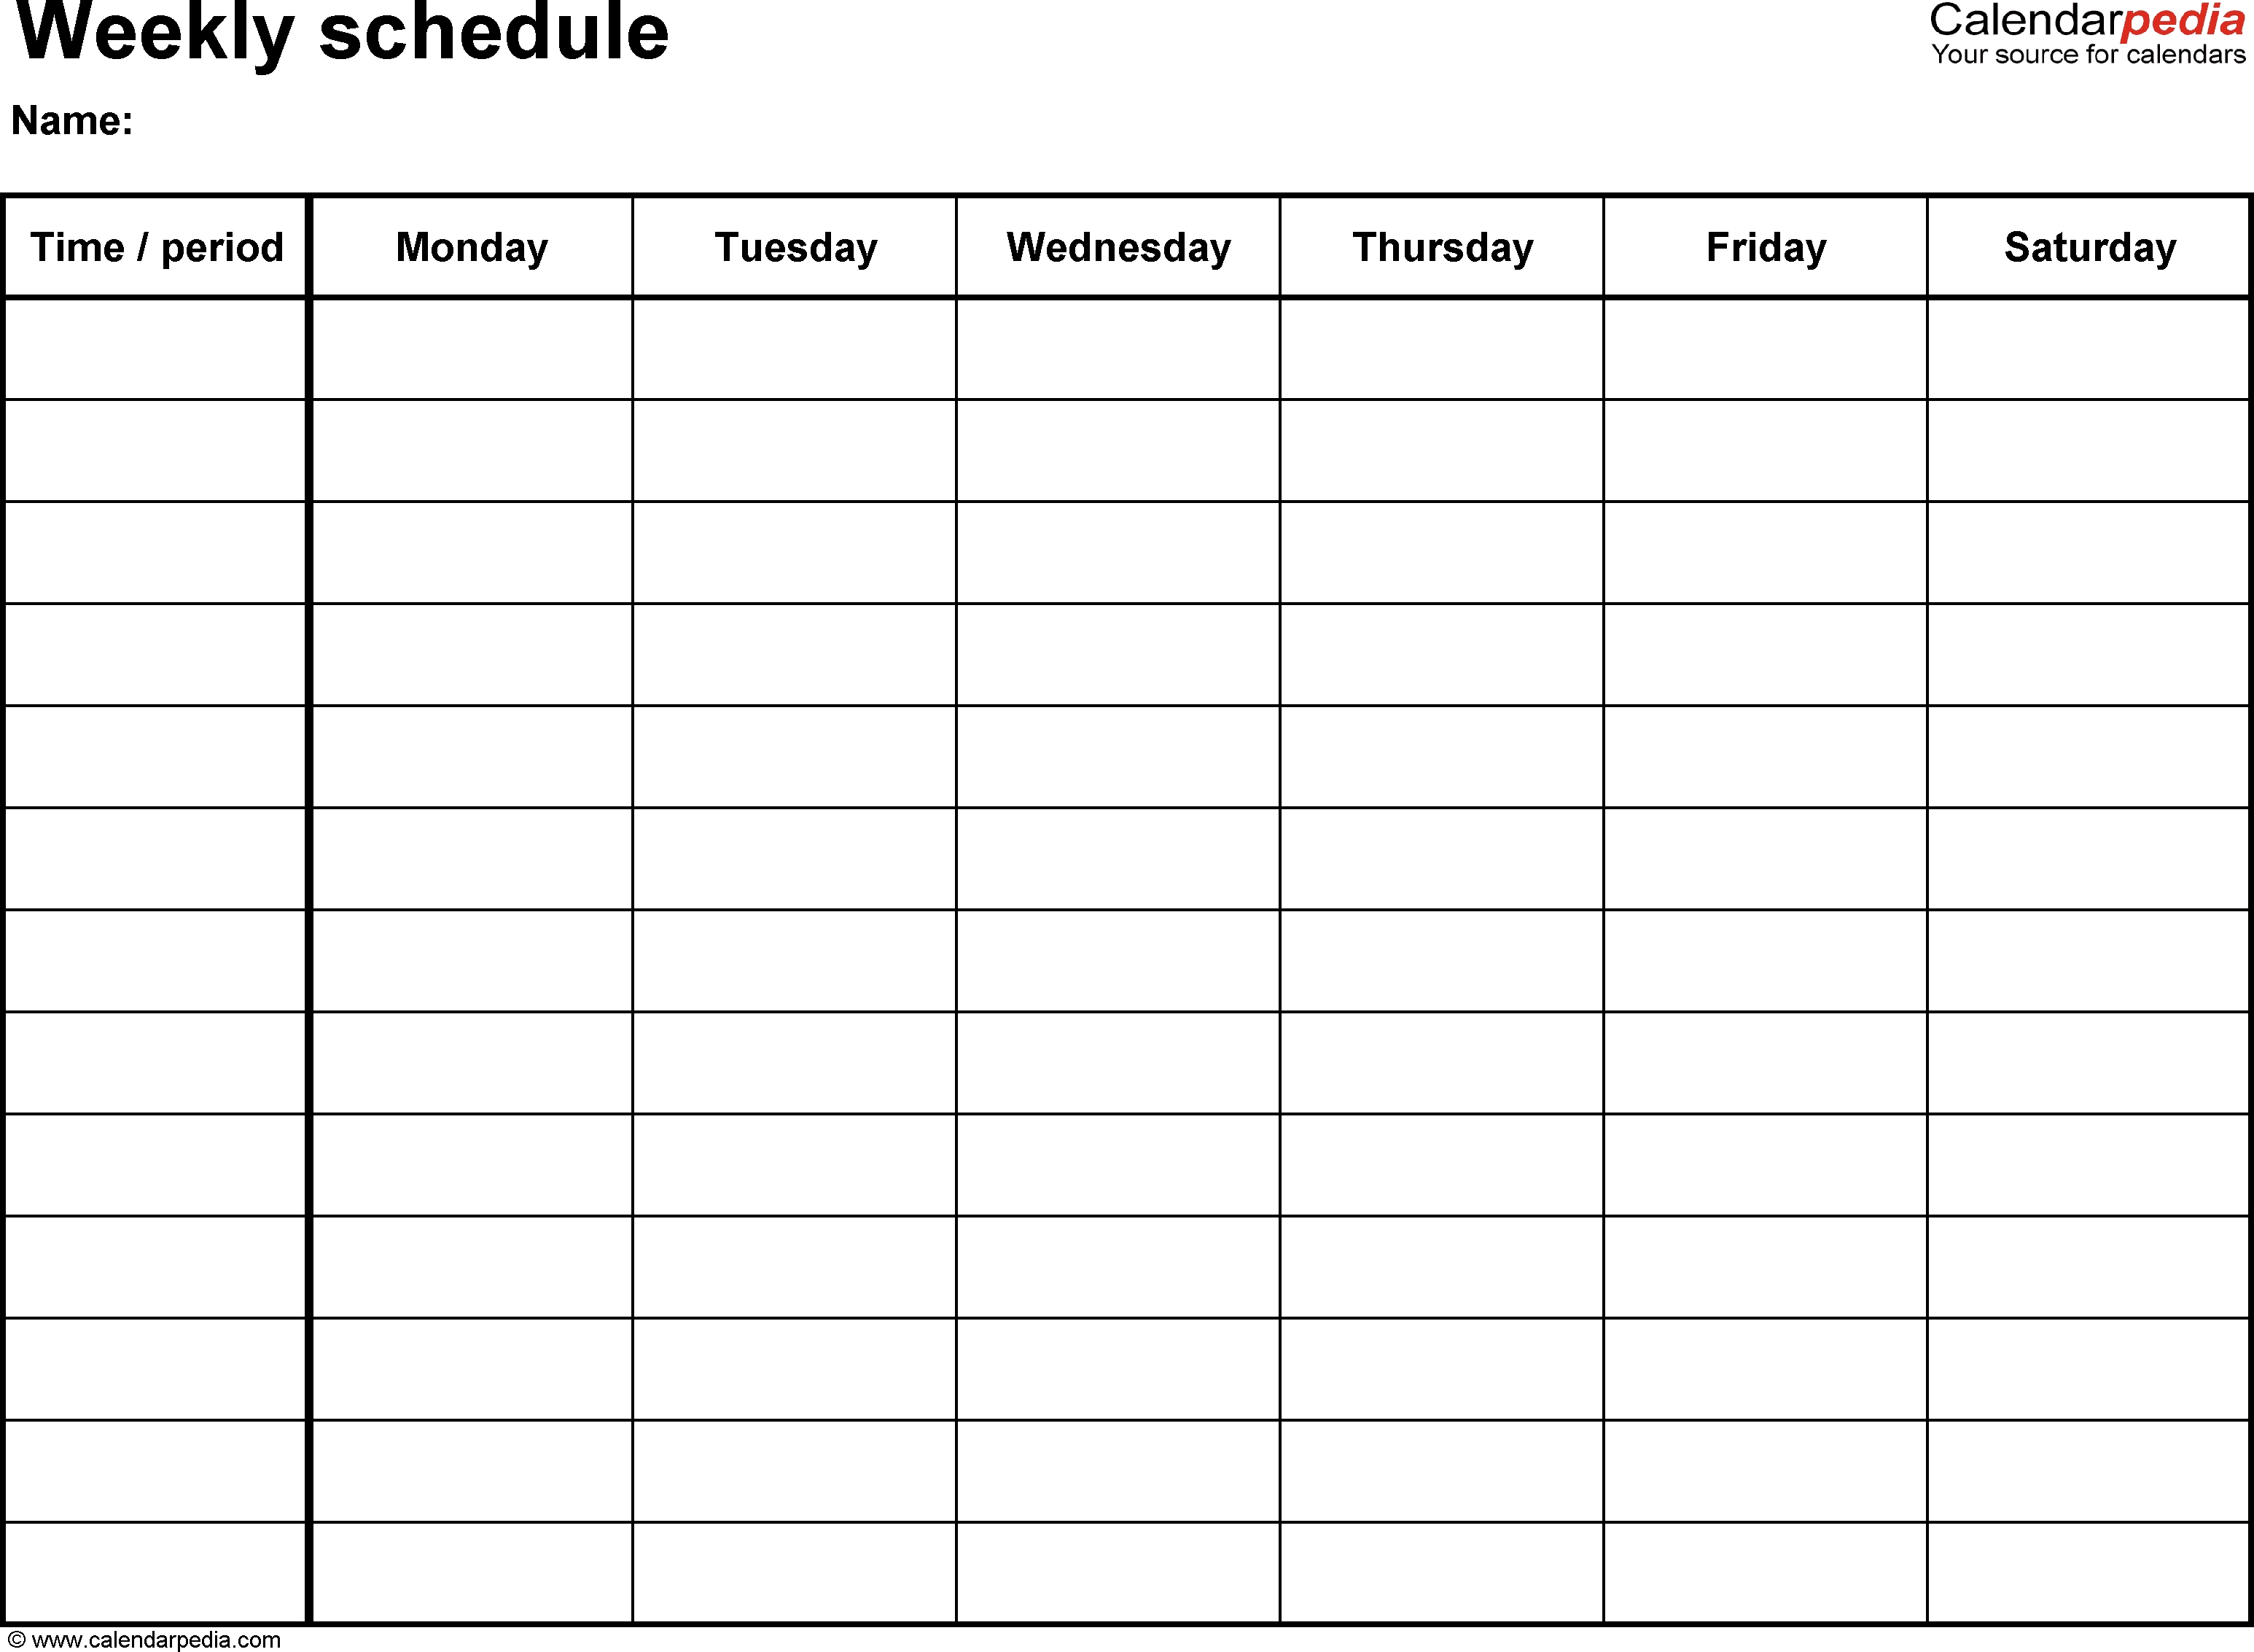 Free Weekly Schedule Templates For Word - 18 Templates inside 2 Week Calendar Template Word